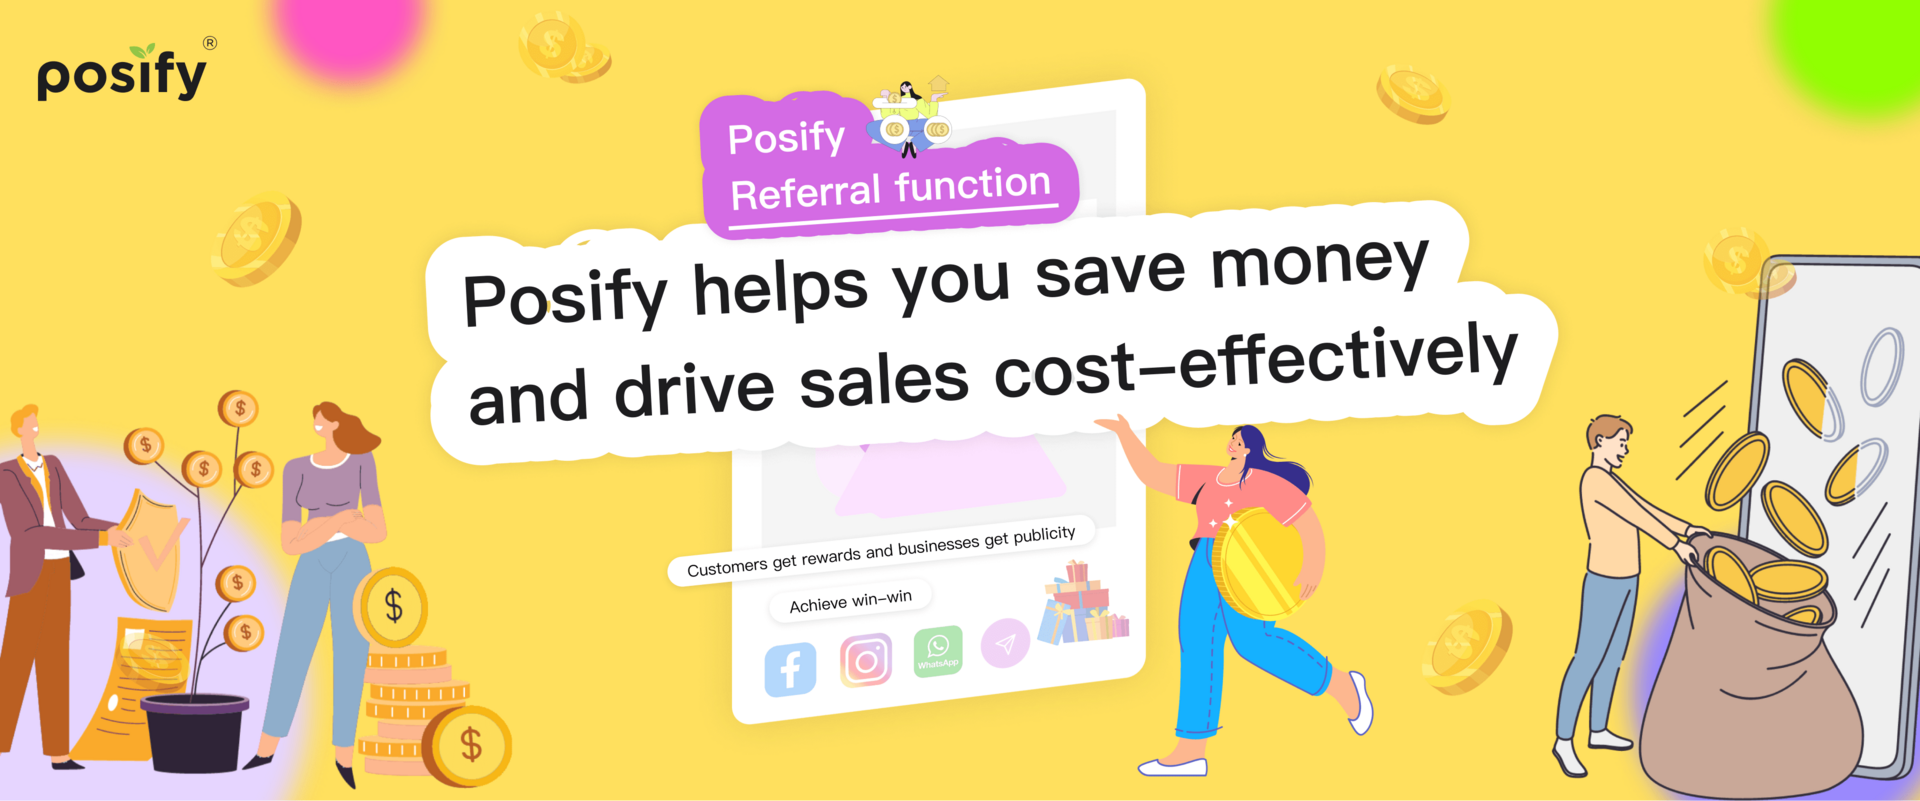 Posify referral function allows you to save money and make money